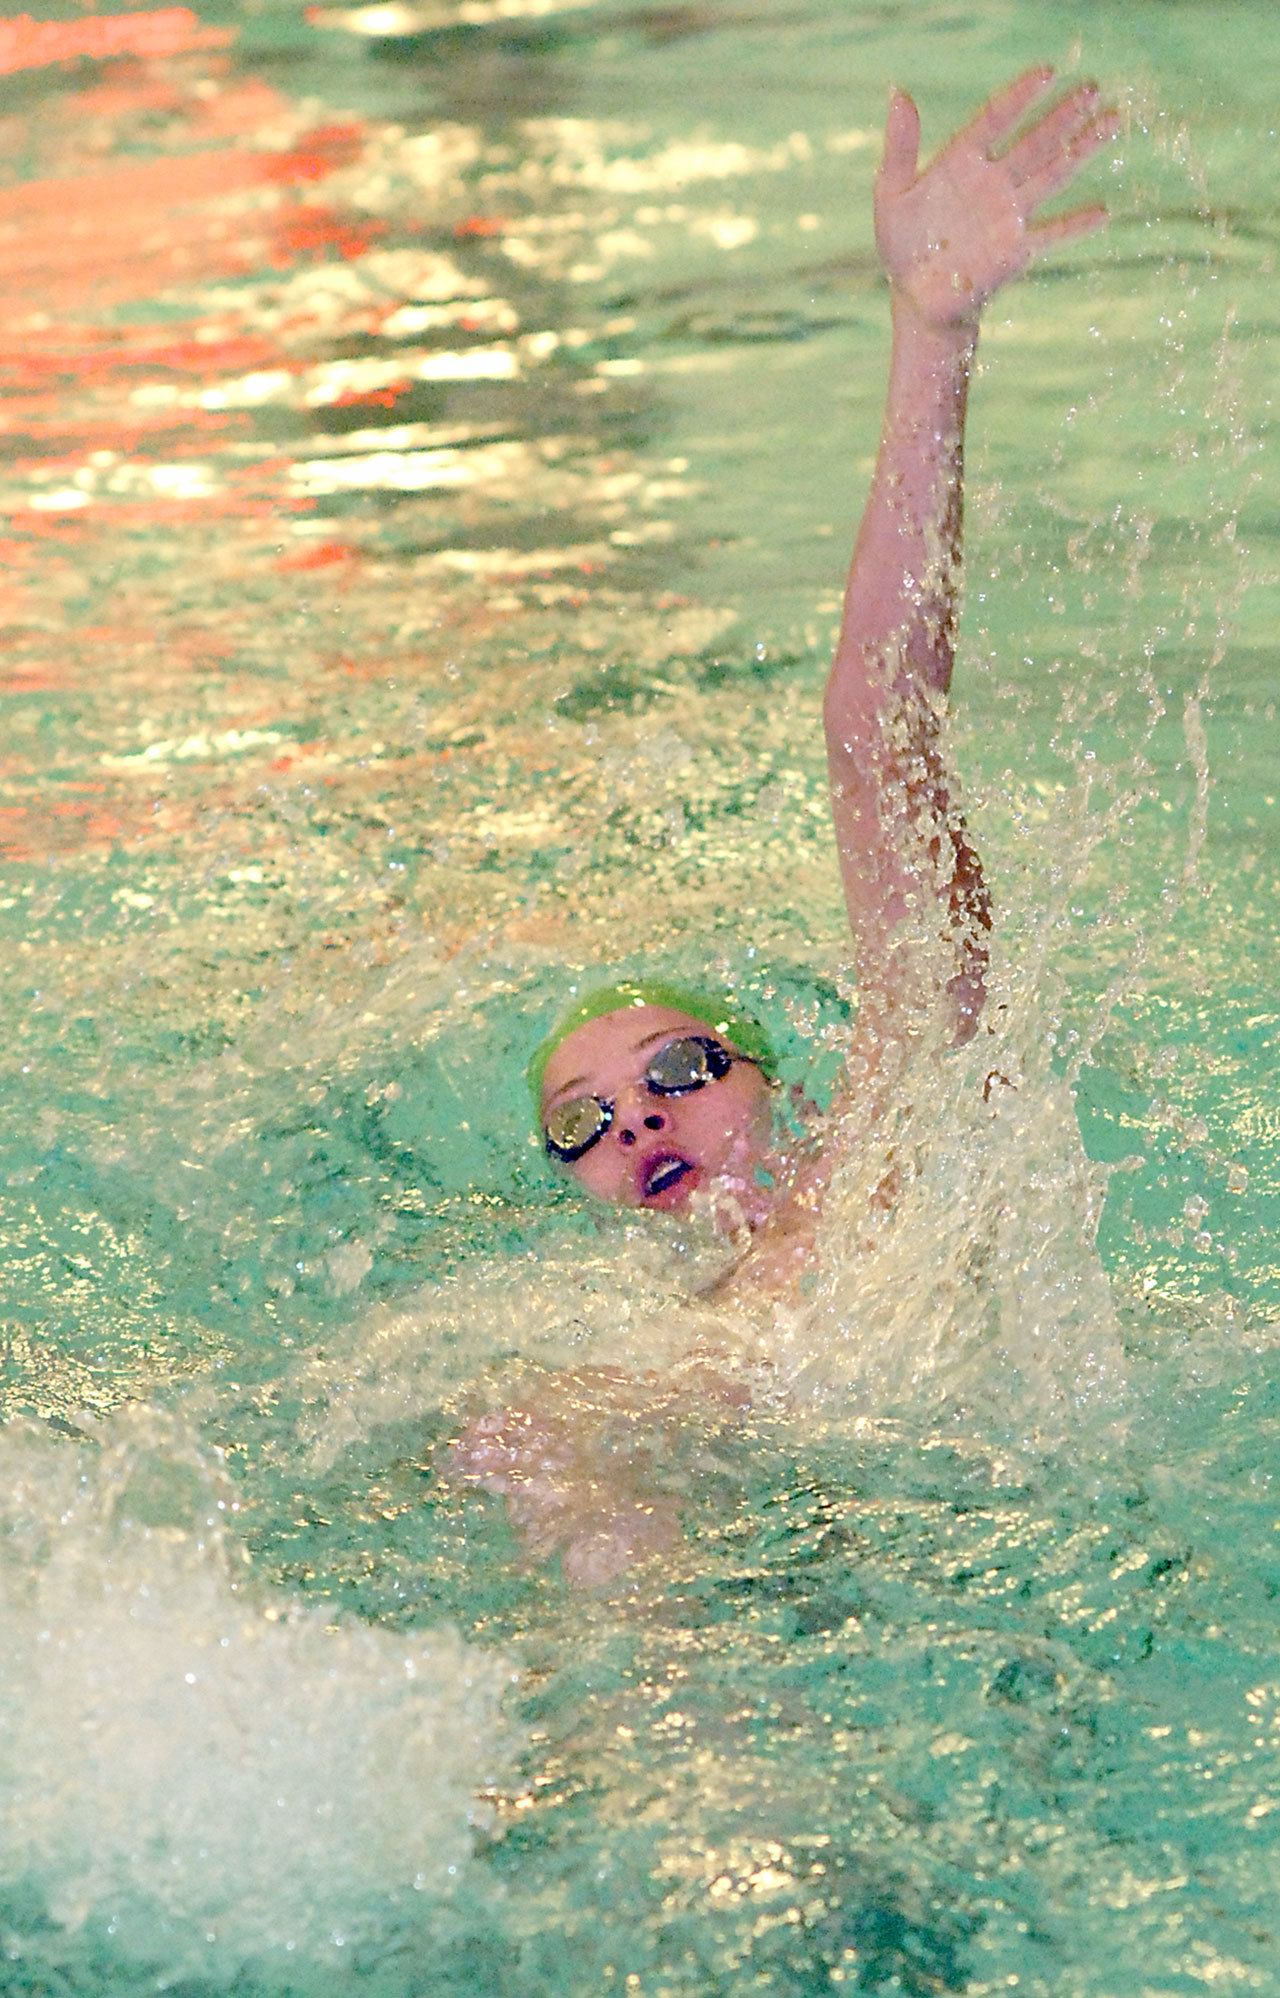 Keith Thorpe/Peninsula Daily News Cameron Butler of Port Angeles swims the backstroke leg of the 200-yard individual medley on Thursday at William Shore Memorial Pool in Port Angeles.